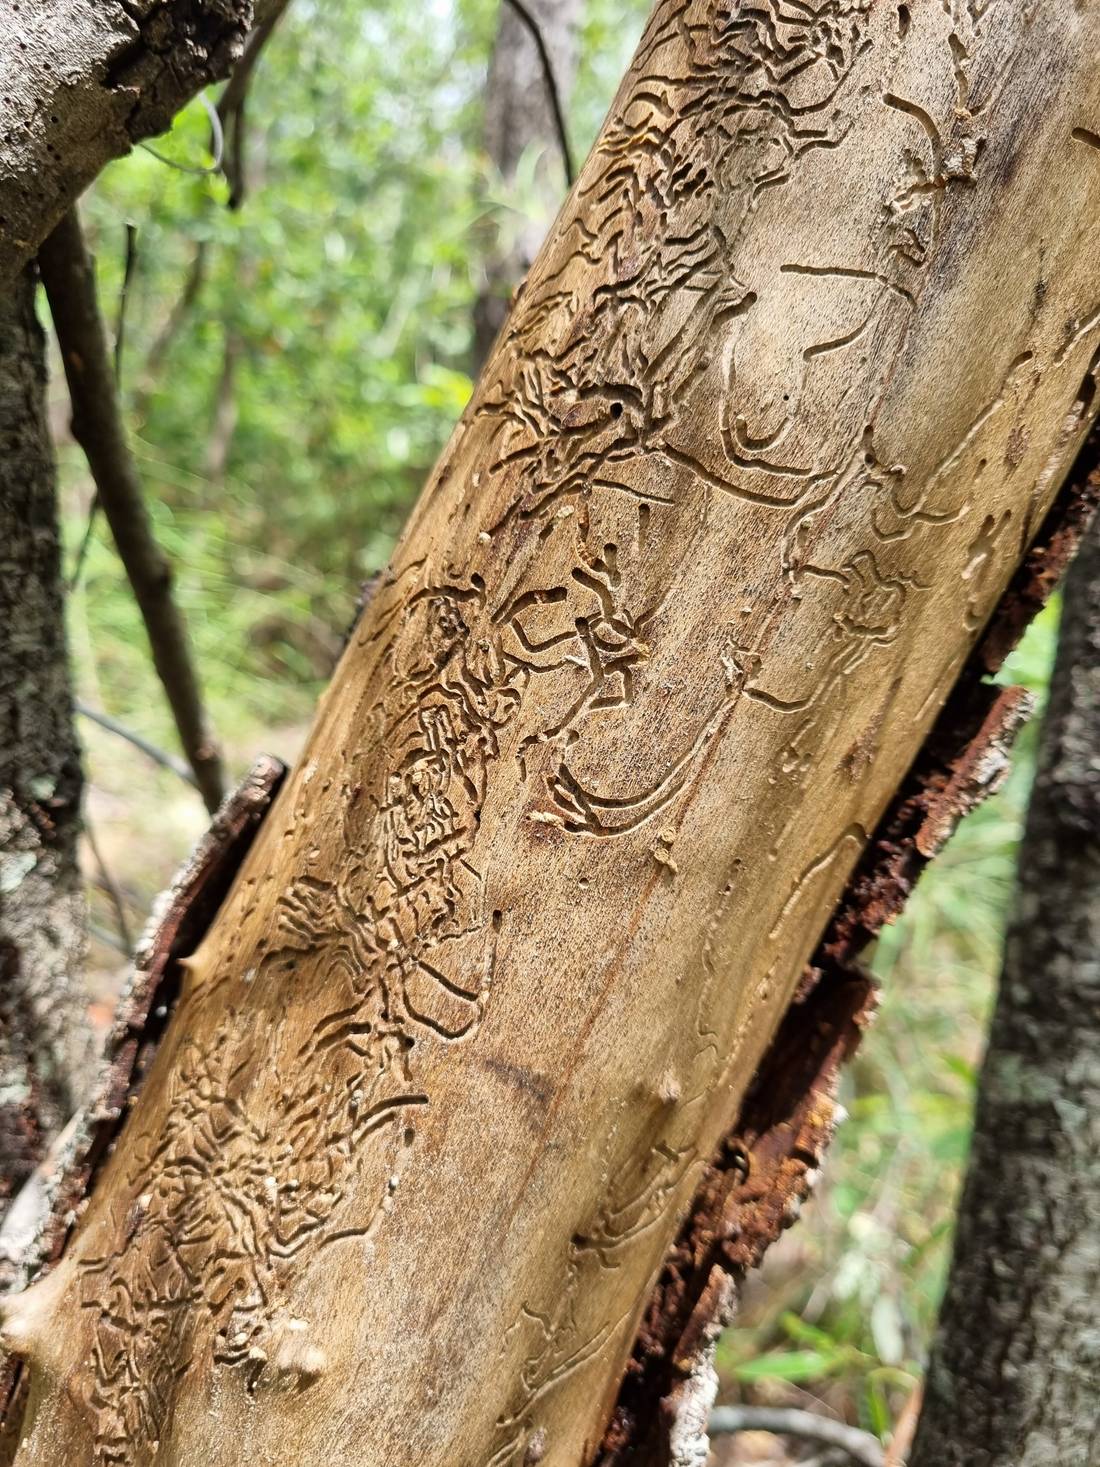 Cool exposed ant carvings after this tree lost its bark.